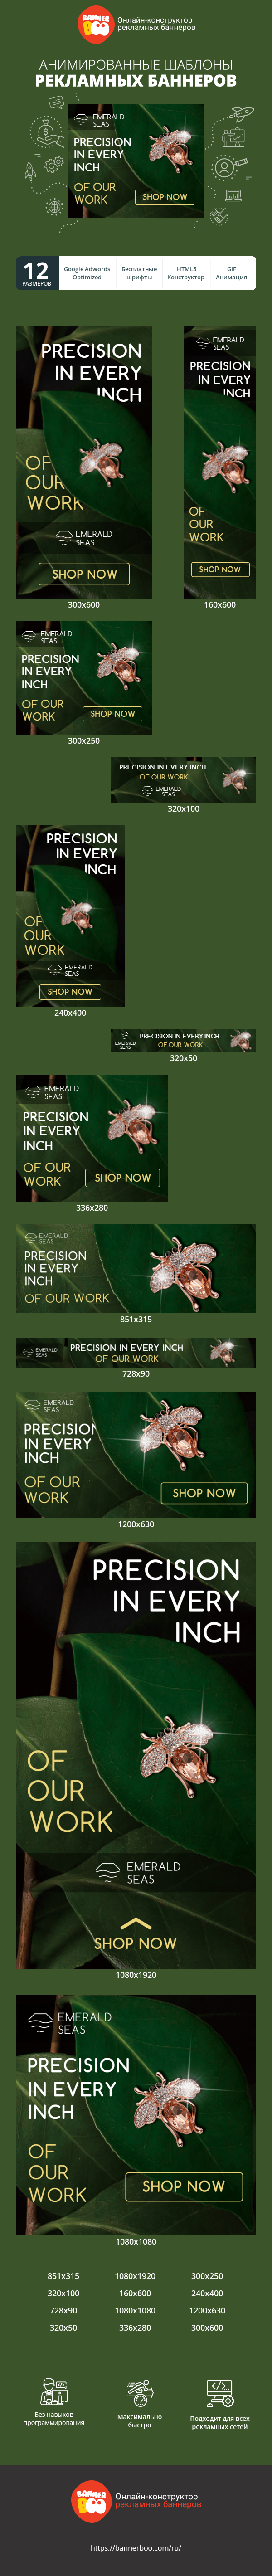 Szablon reklamy banerowej — Precision In Every Inch Of Our Work — Jewelry Store